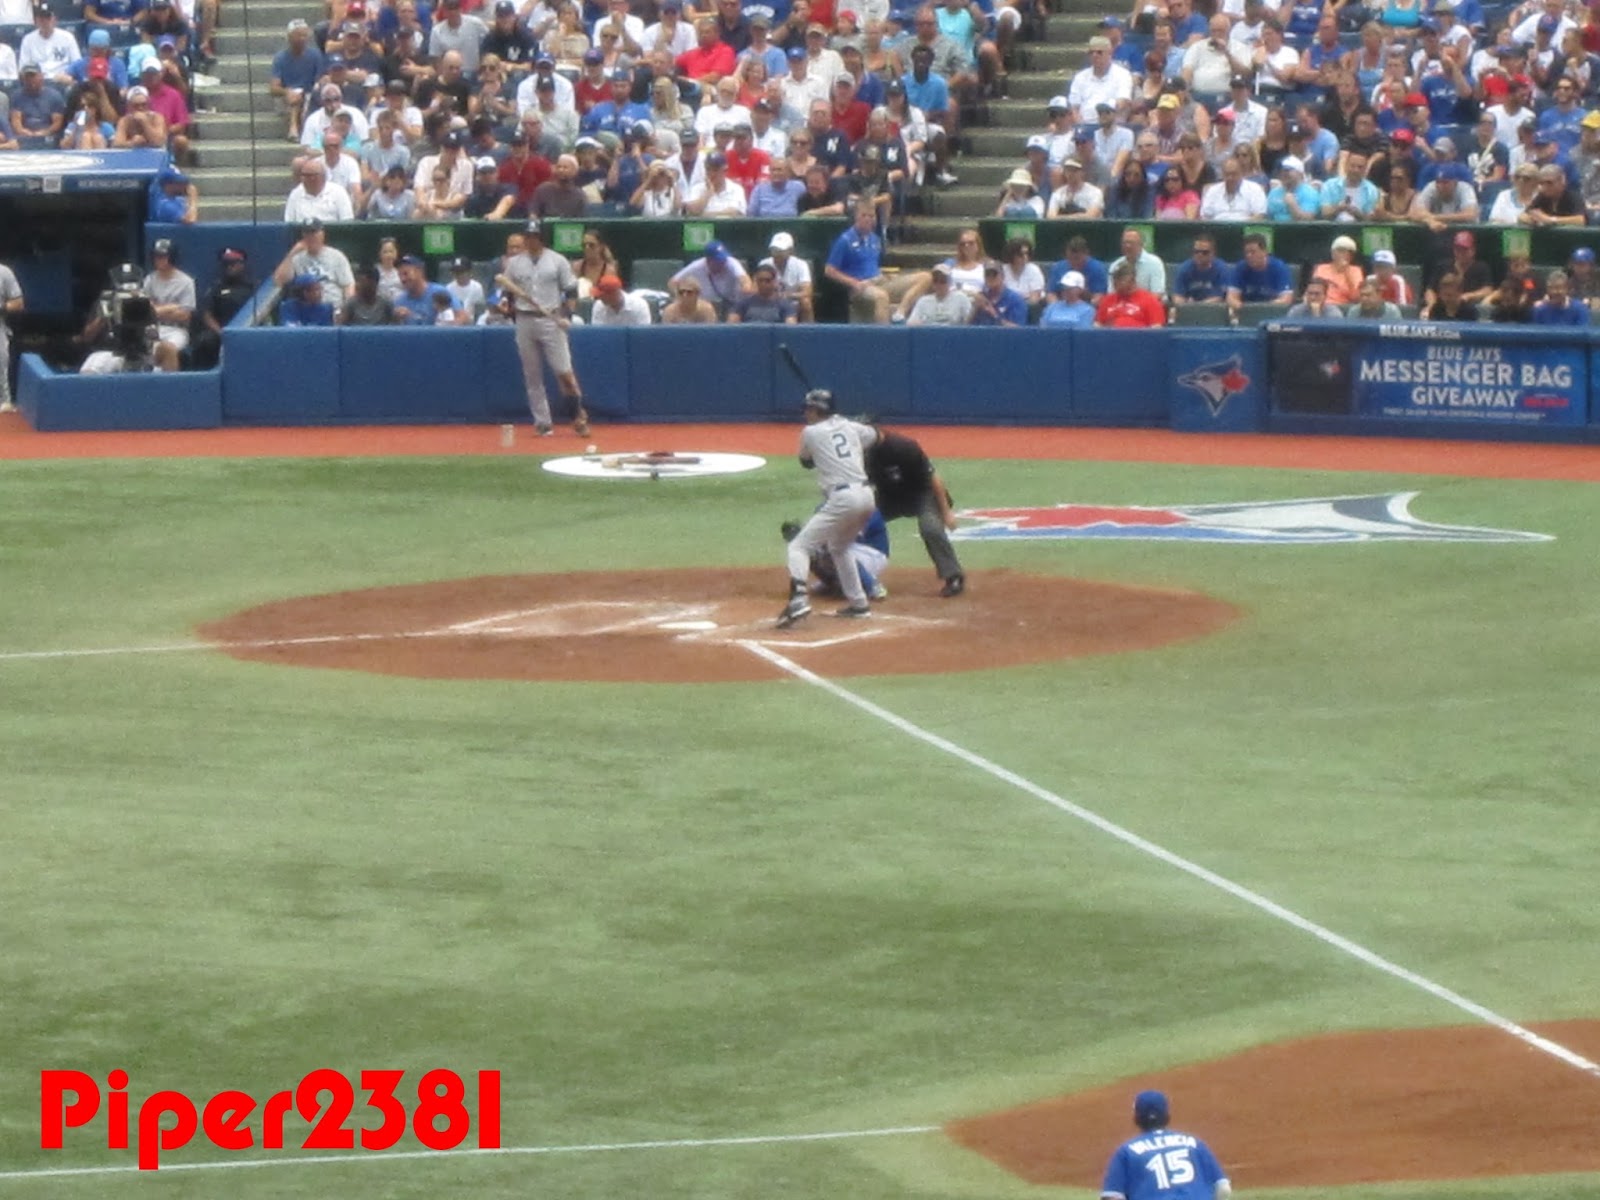 Piper2381: Vlog: Jeter’s Last Game in Toronto, and Stan Lee1600 x 1200